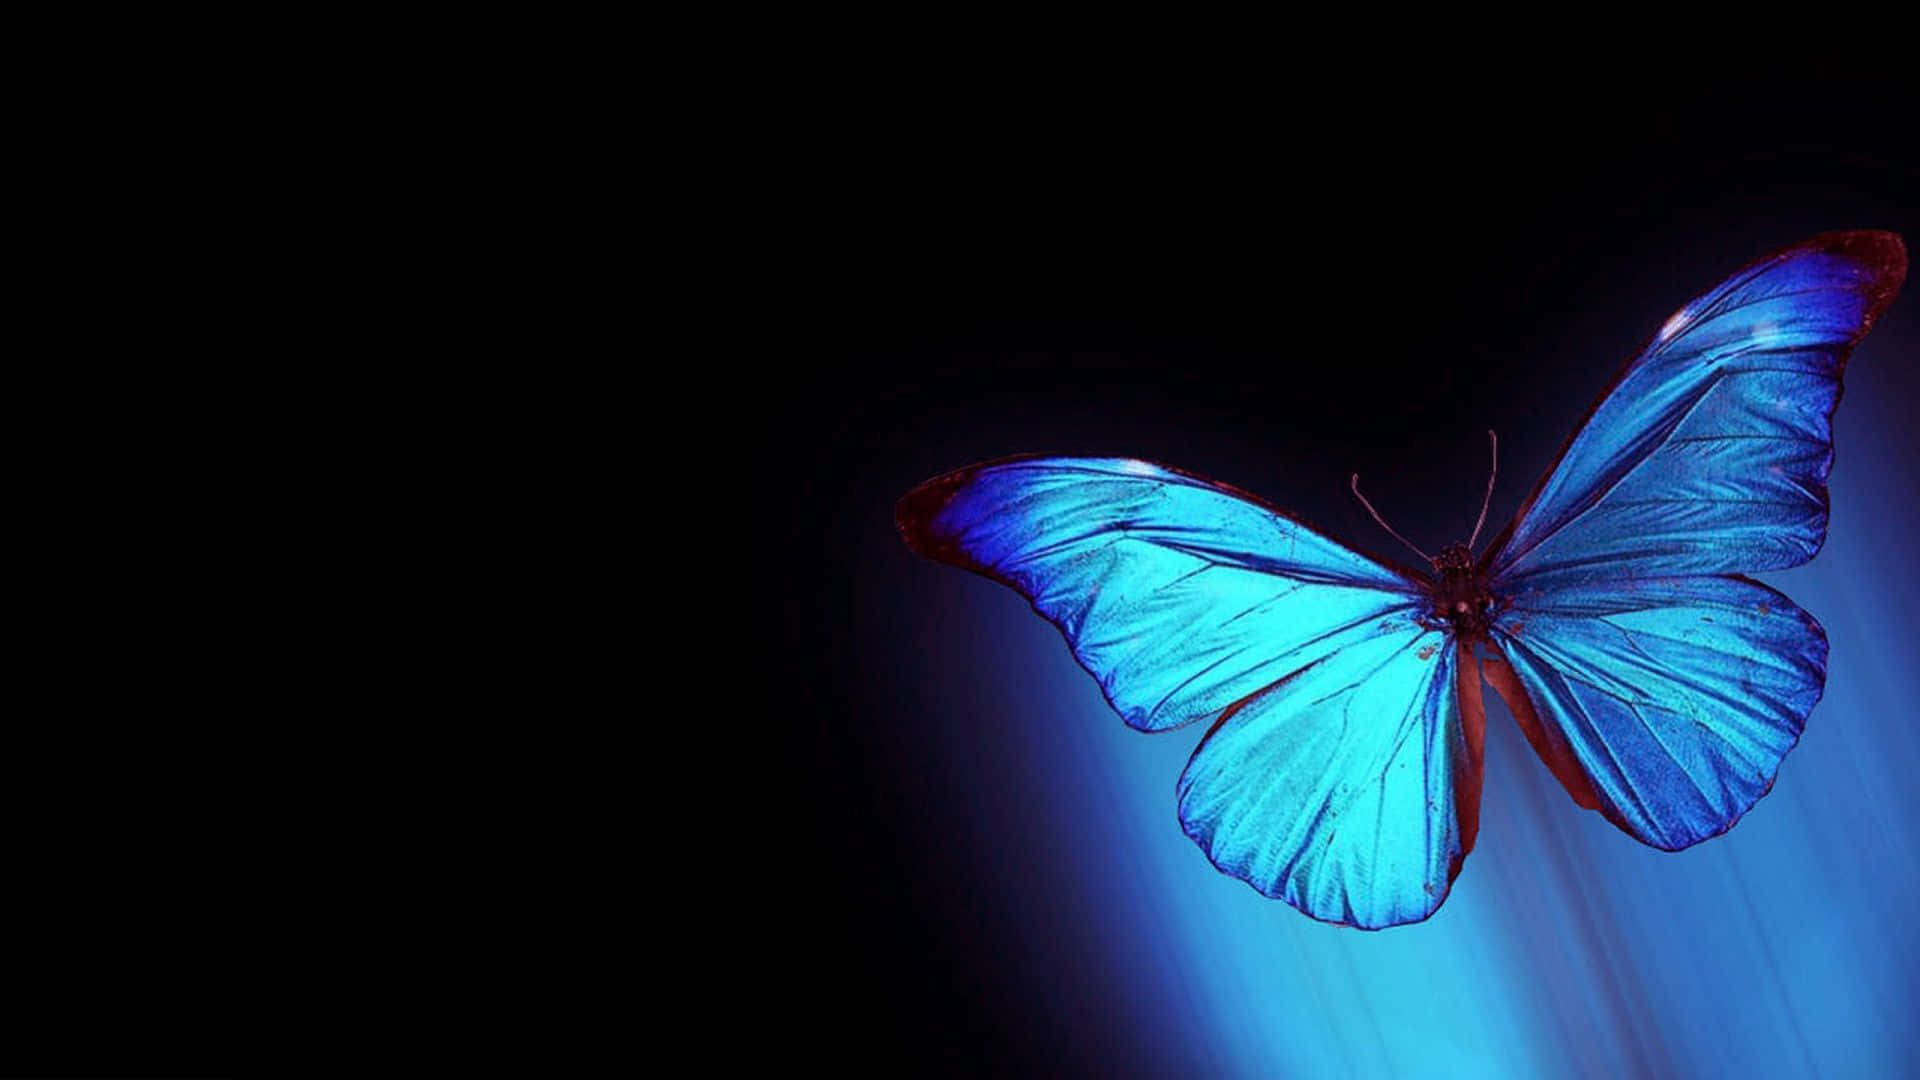 Mysterious Dark Butterfly on a Black Background Wallpaper